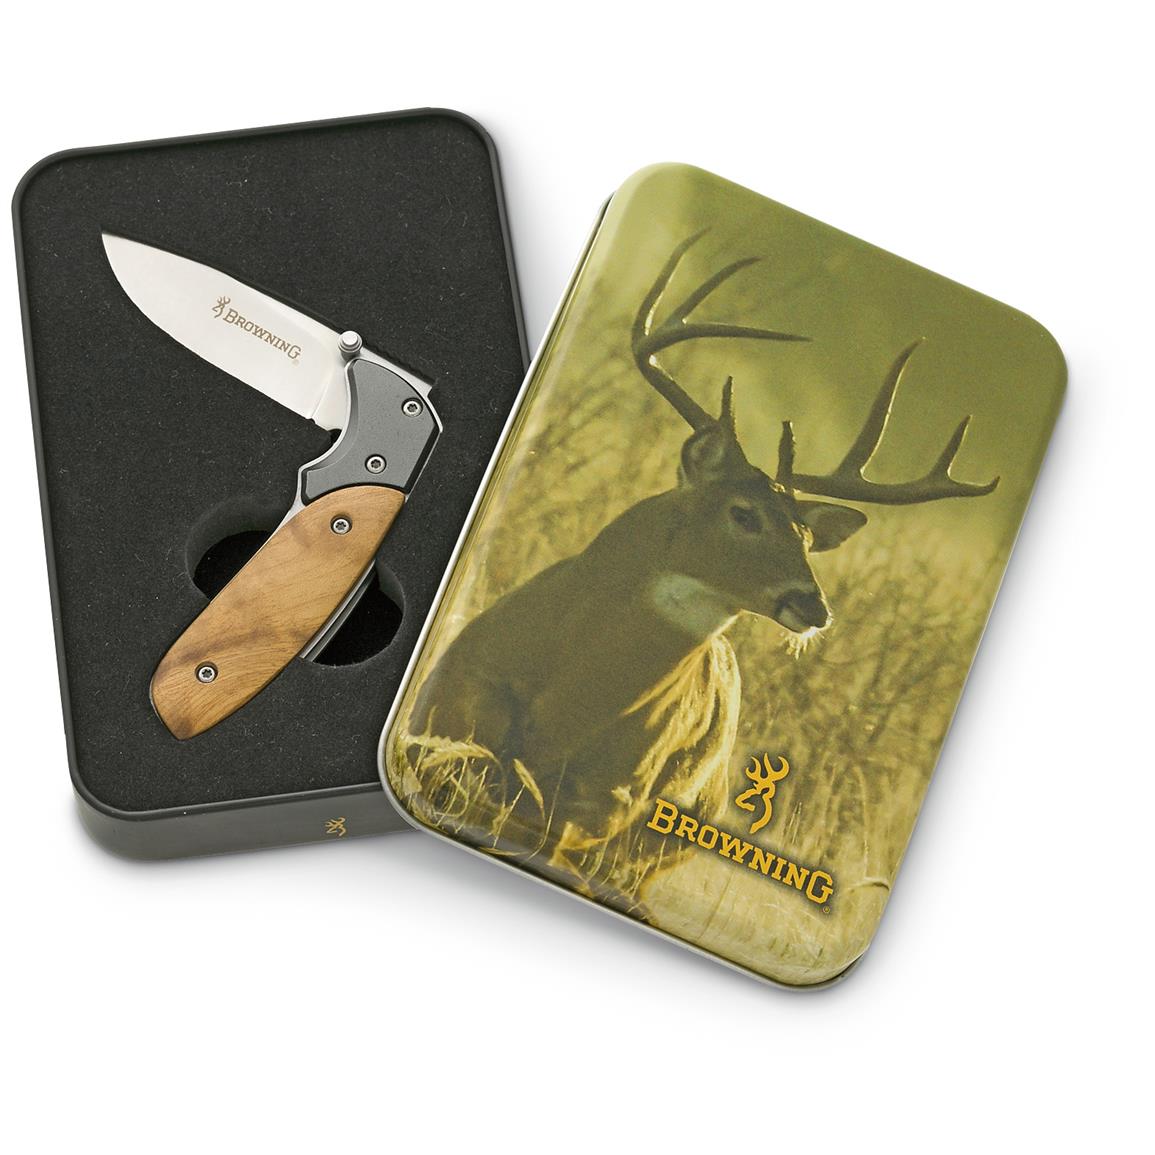 Browning Whitetail 2015 Collectible Folding Knife, 2 1/2" Blade